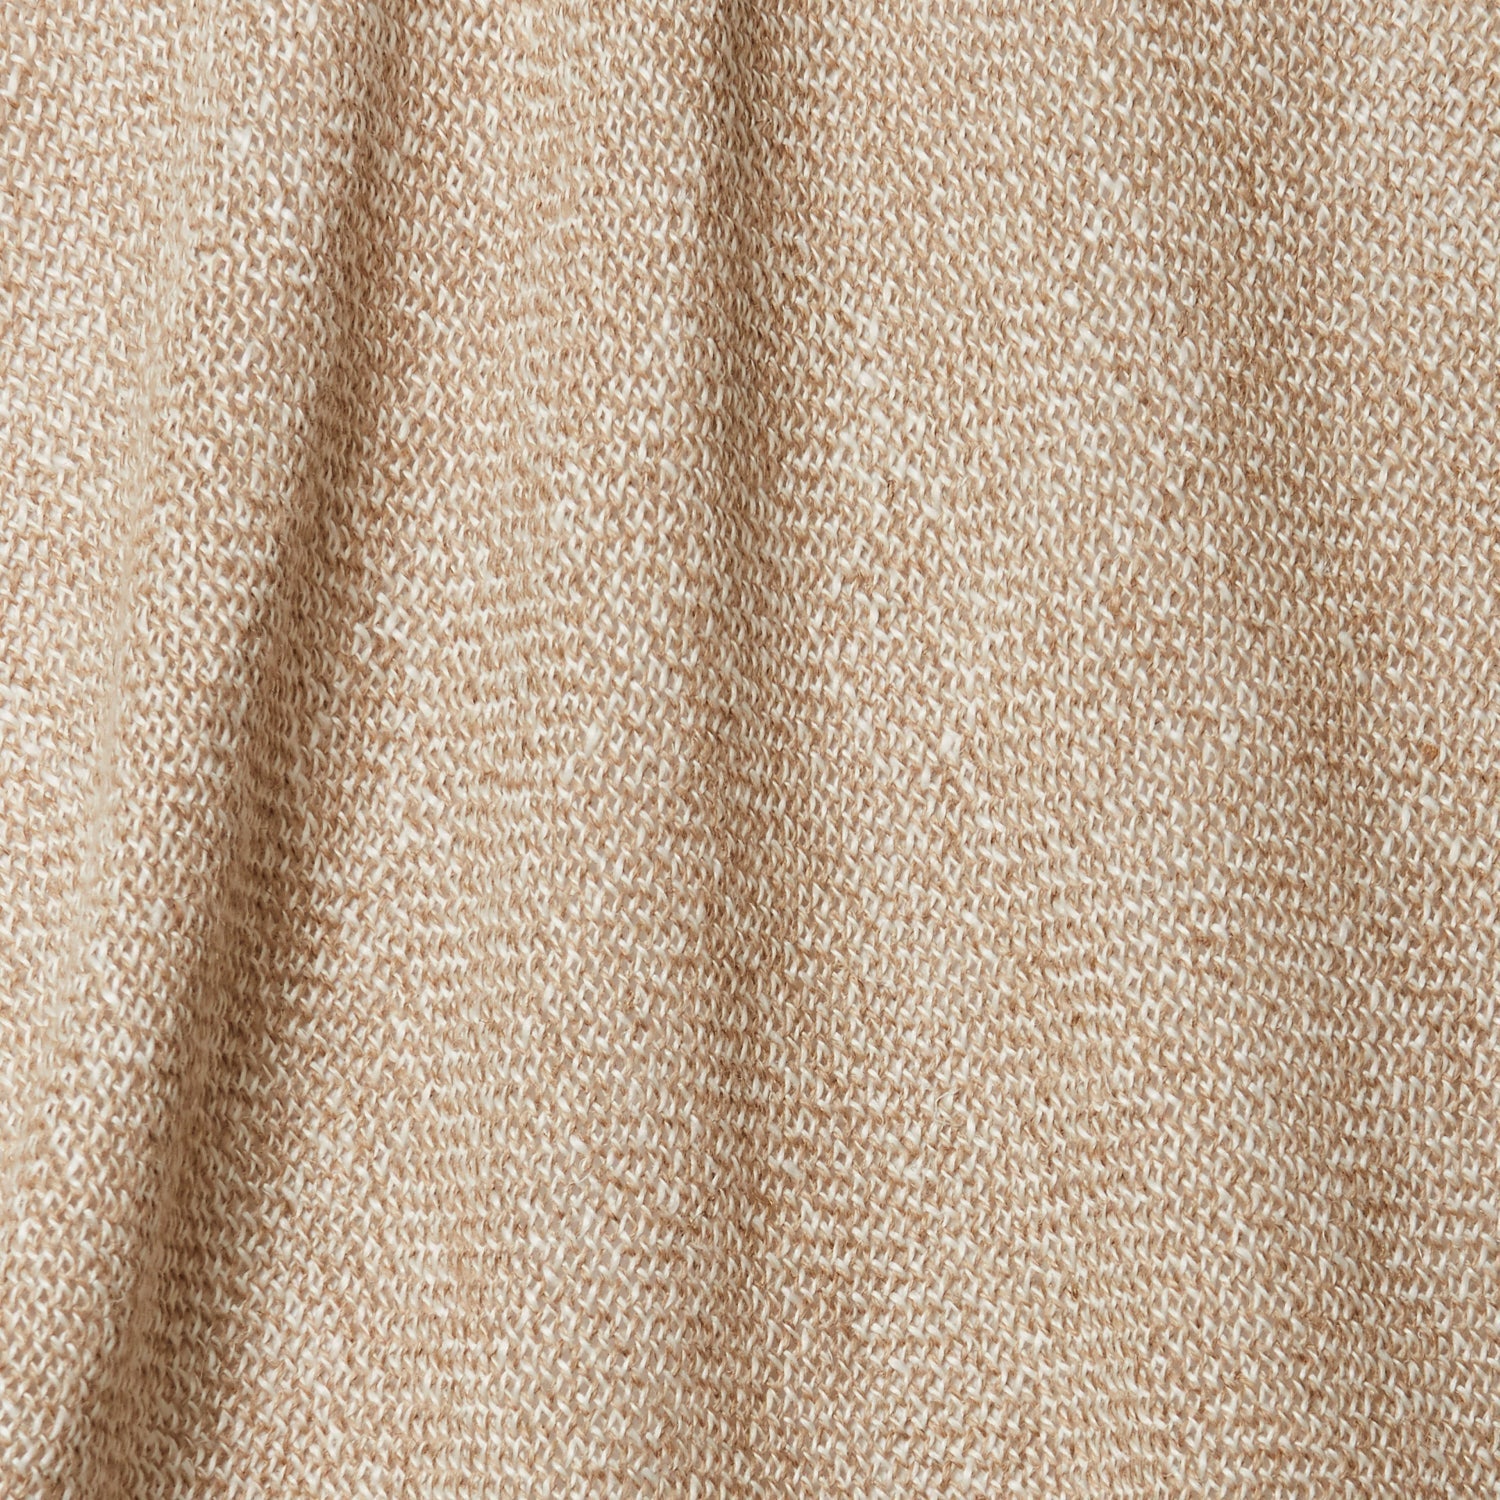 A draped swatch of open-weave sheer interior fabric in a beige color.